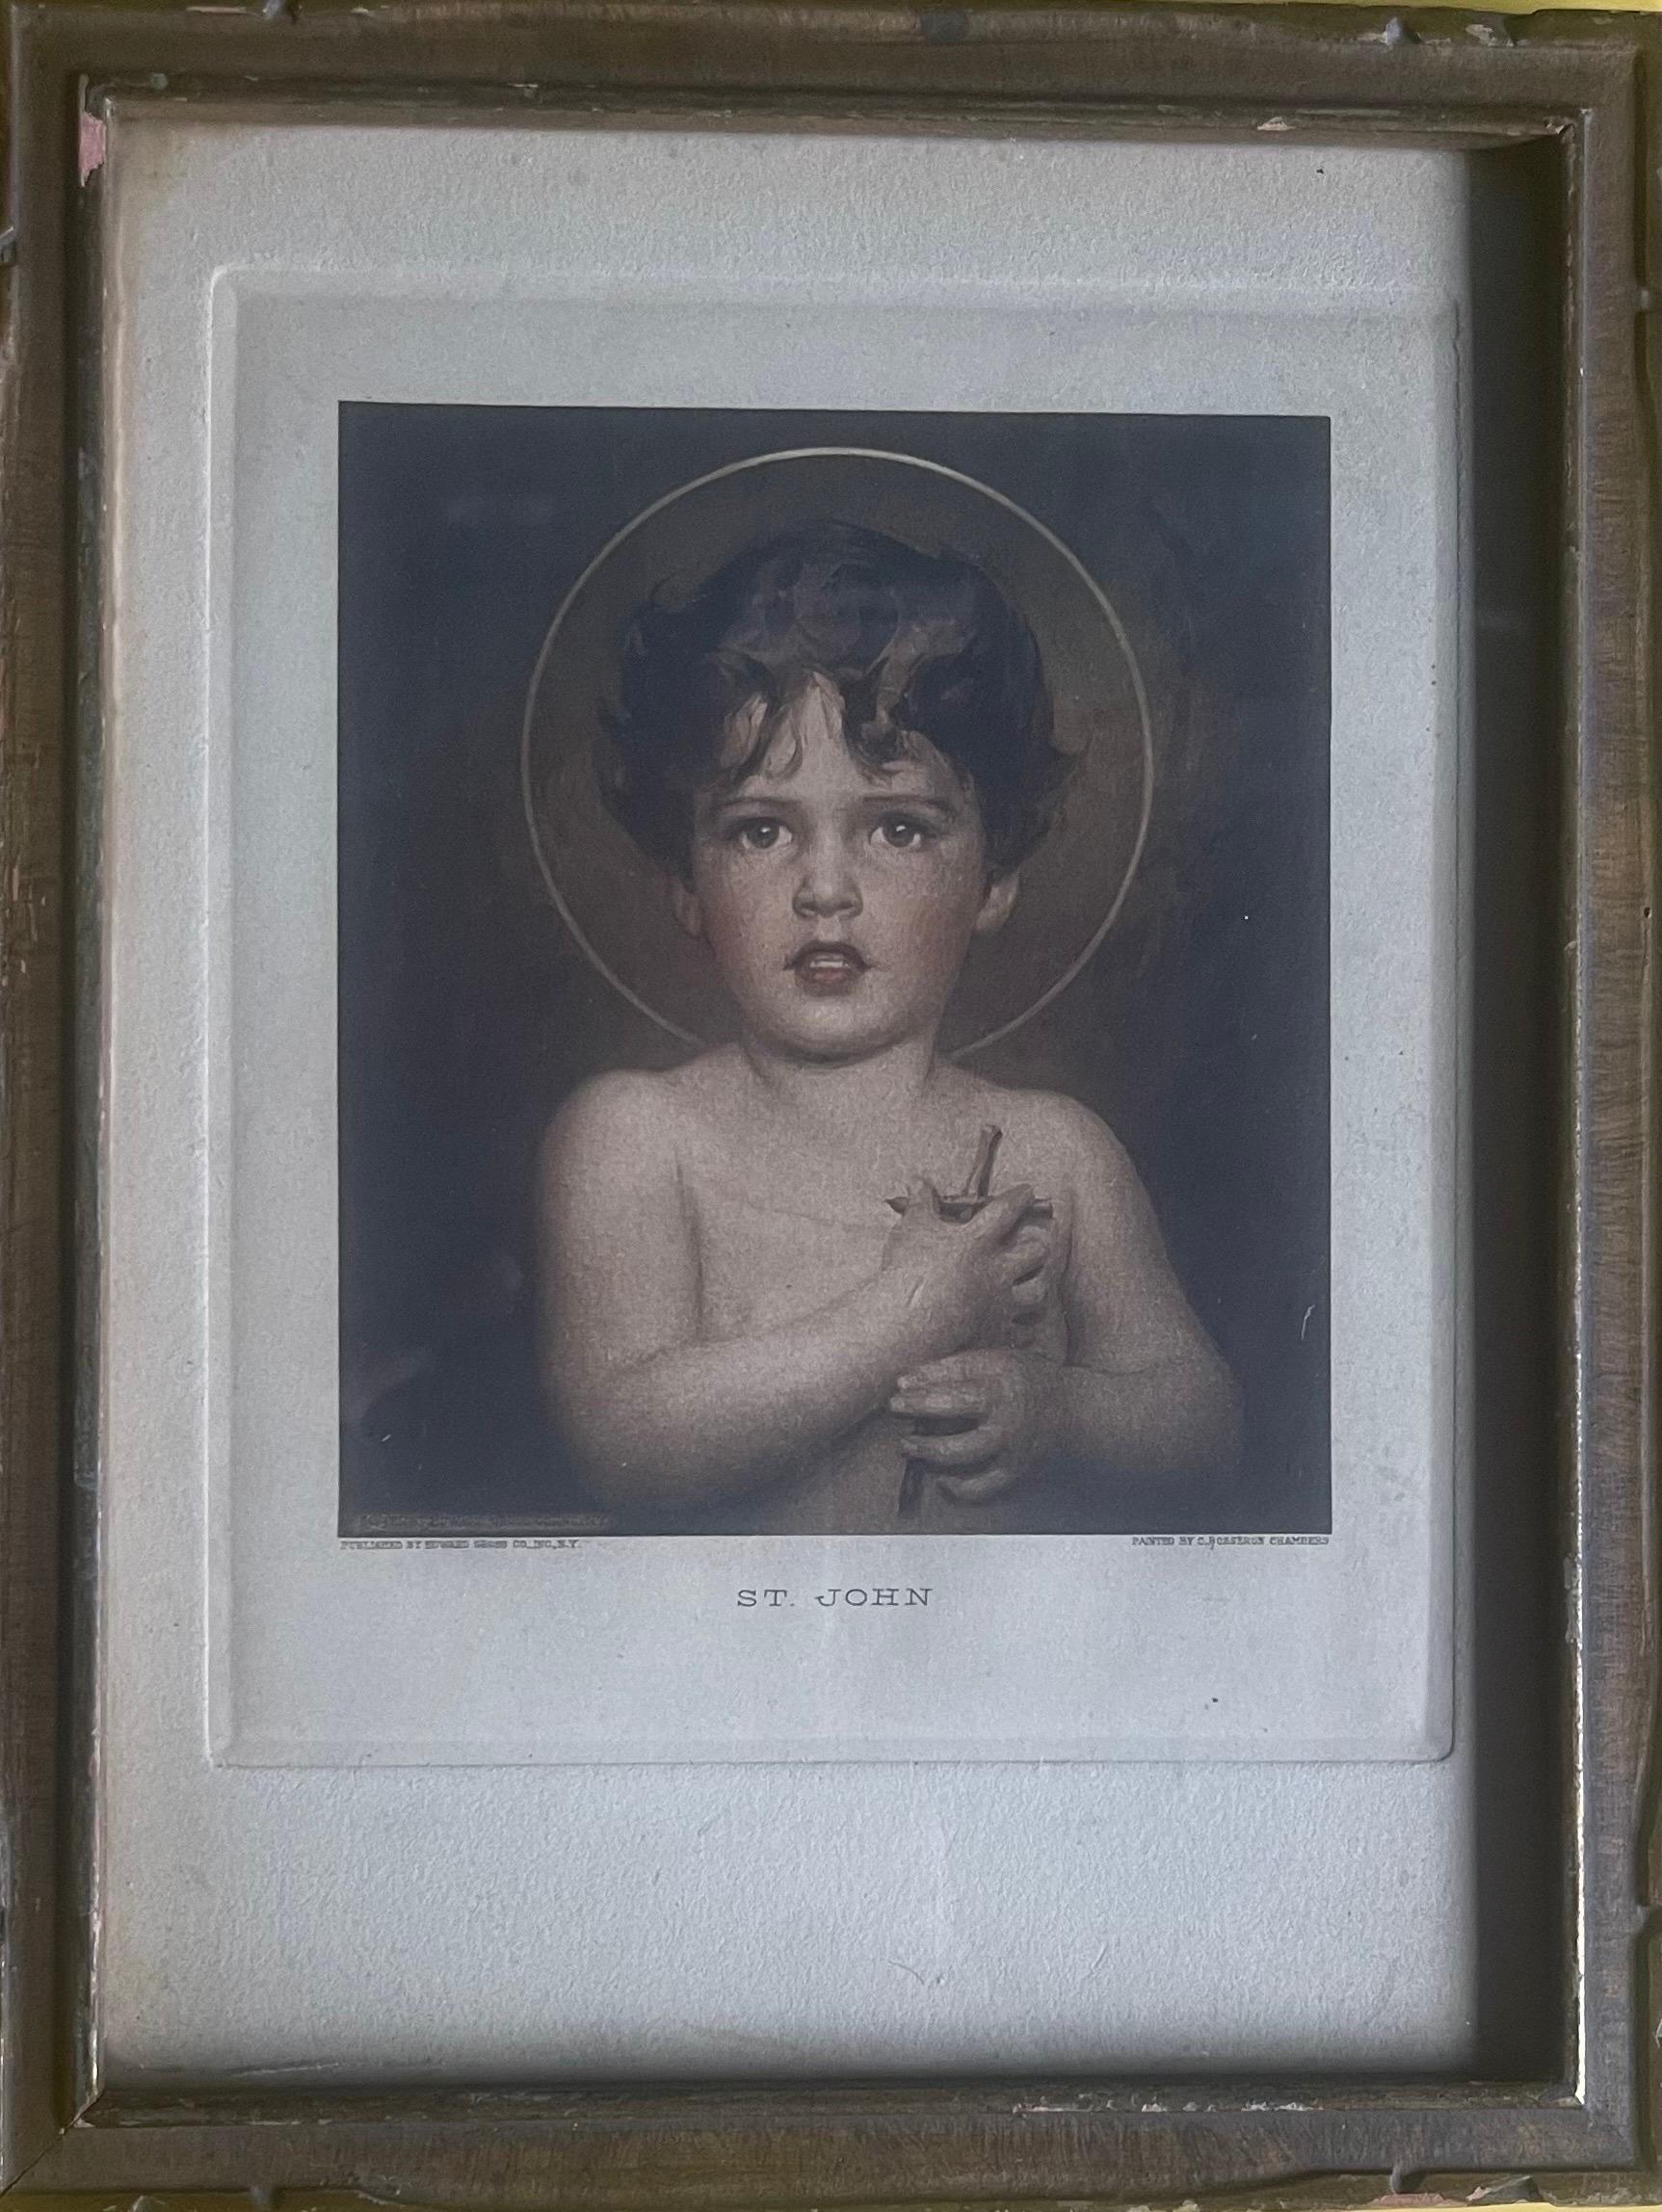 Highly collectible vintage lithograph print of original painting by American artist Charles Bosseron Chambers, circa 1930s. The iconic image depicts St John the Baptist as a cherubic young boy, holding a wooden crucifix to his heart. The print is a